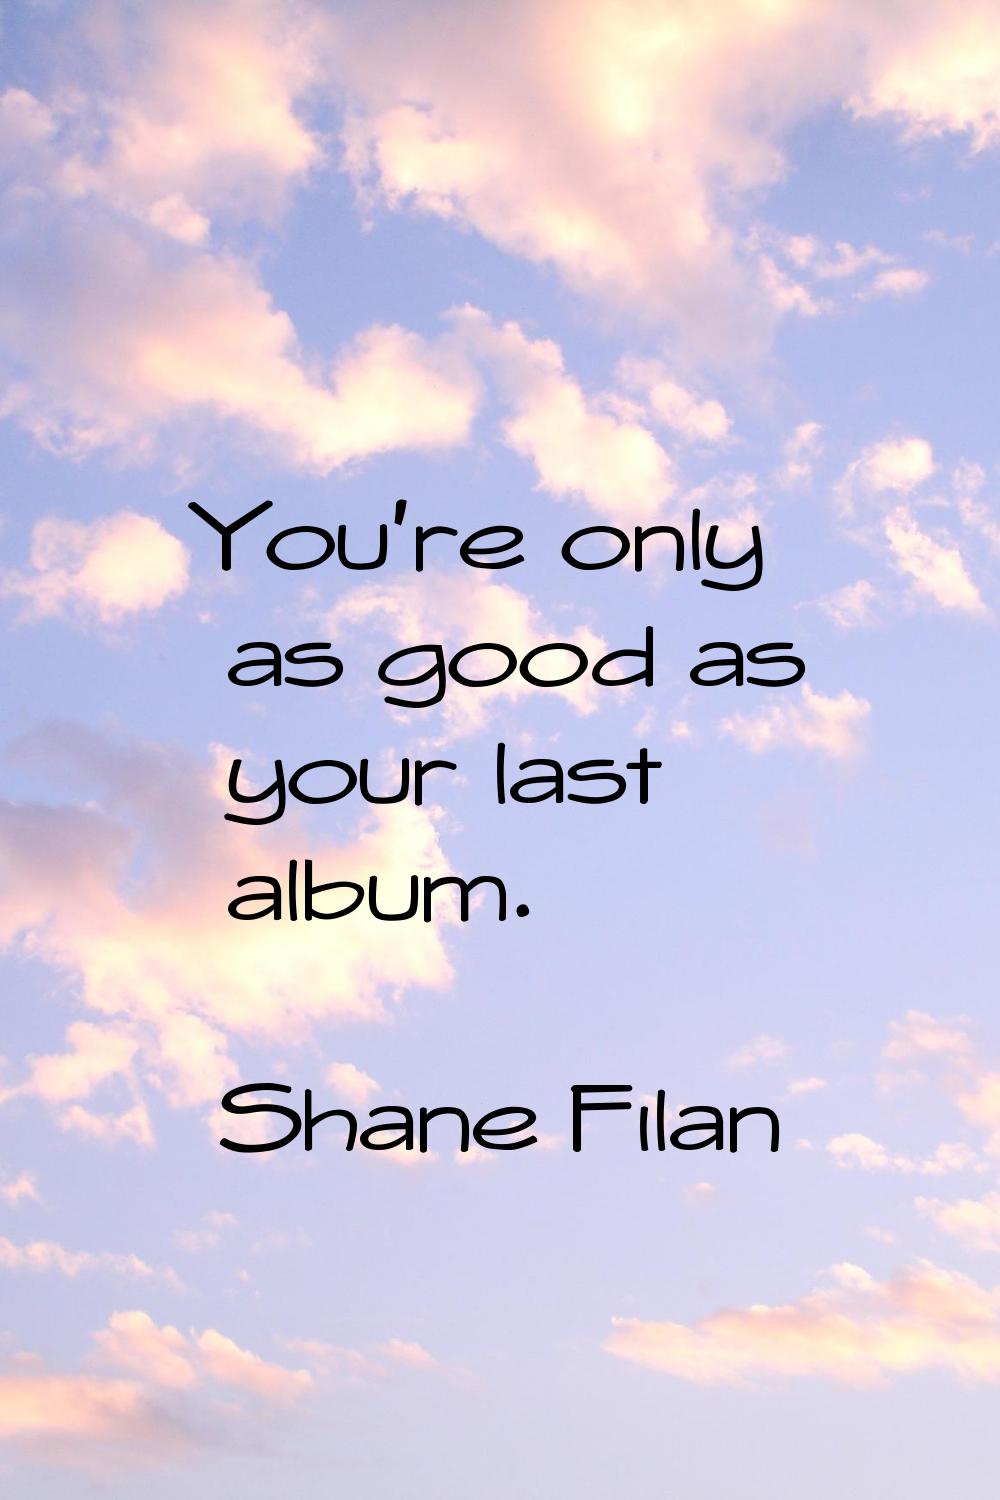 You're only as good as your last album.